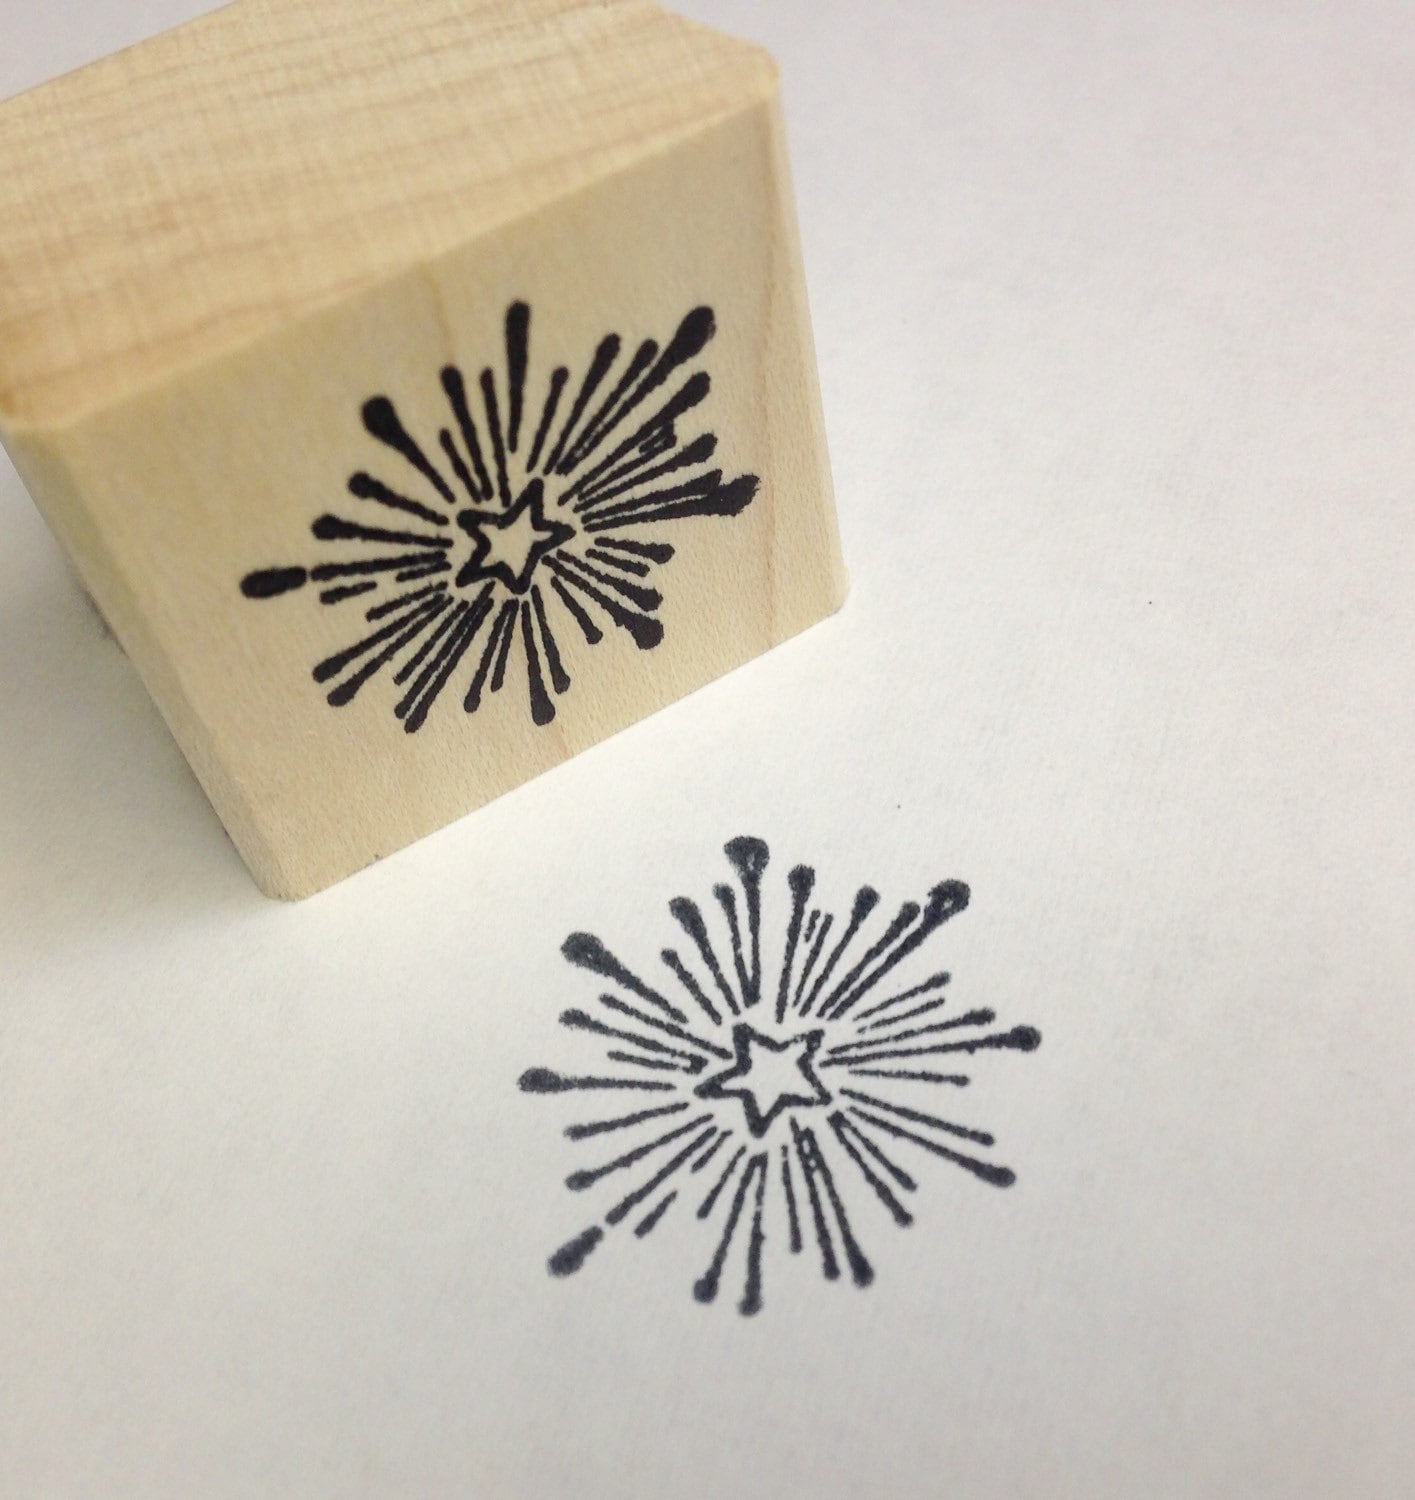 One Small Star Wood Mounted Rubber Stamp 4757 Etsy